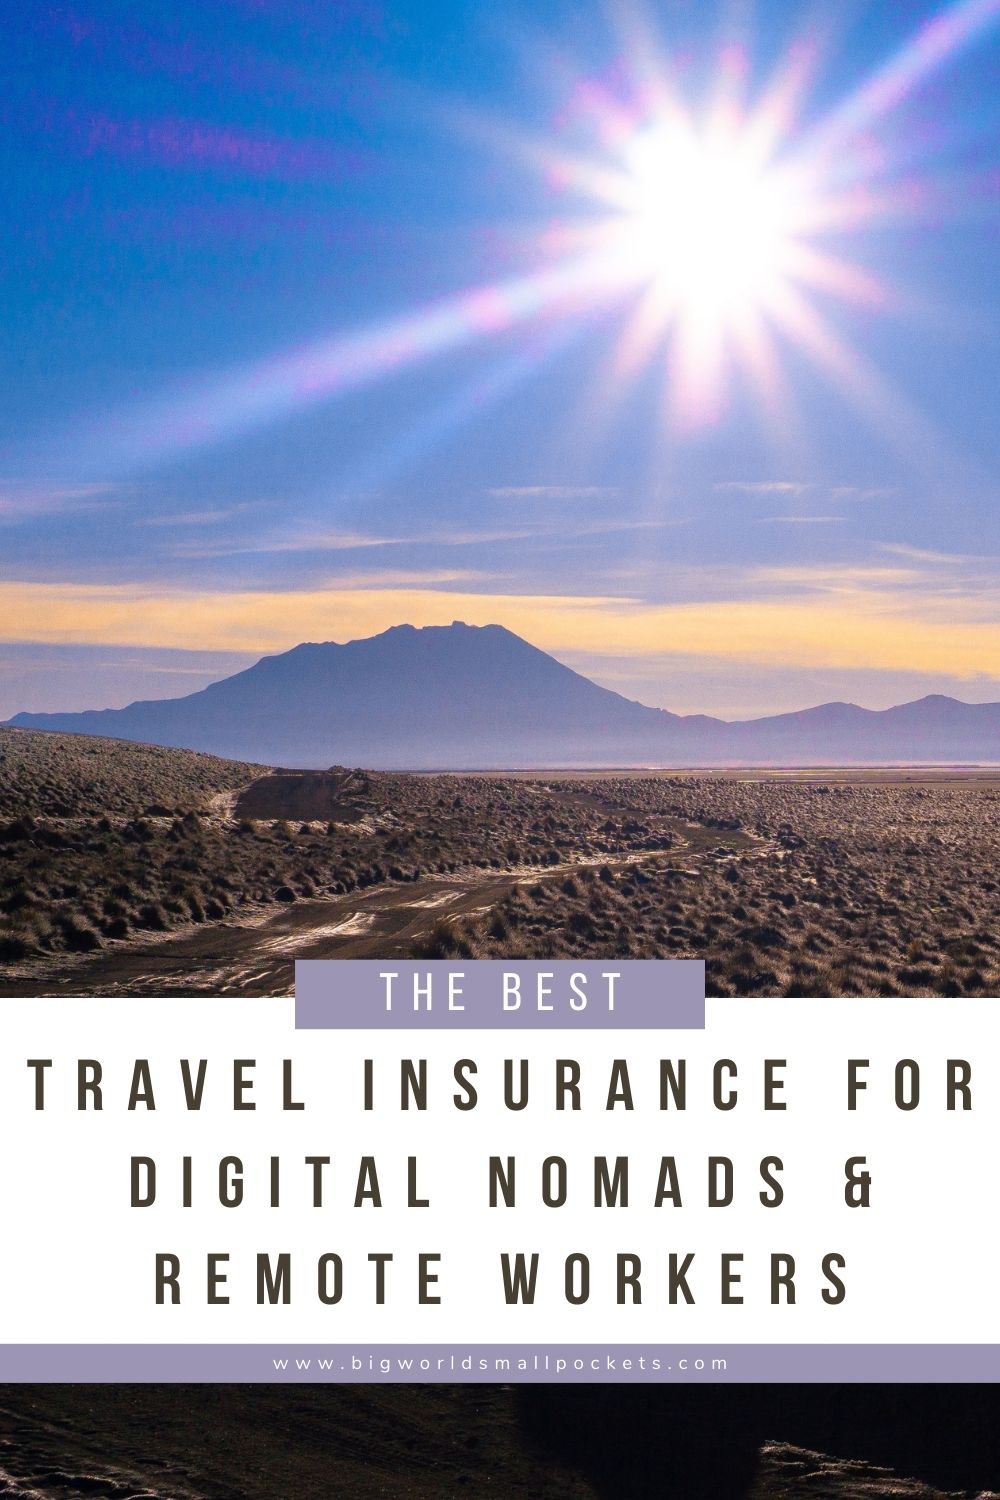 The Best Travel Insurance for Digital Nomads and Remote Workers